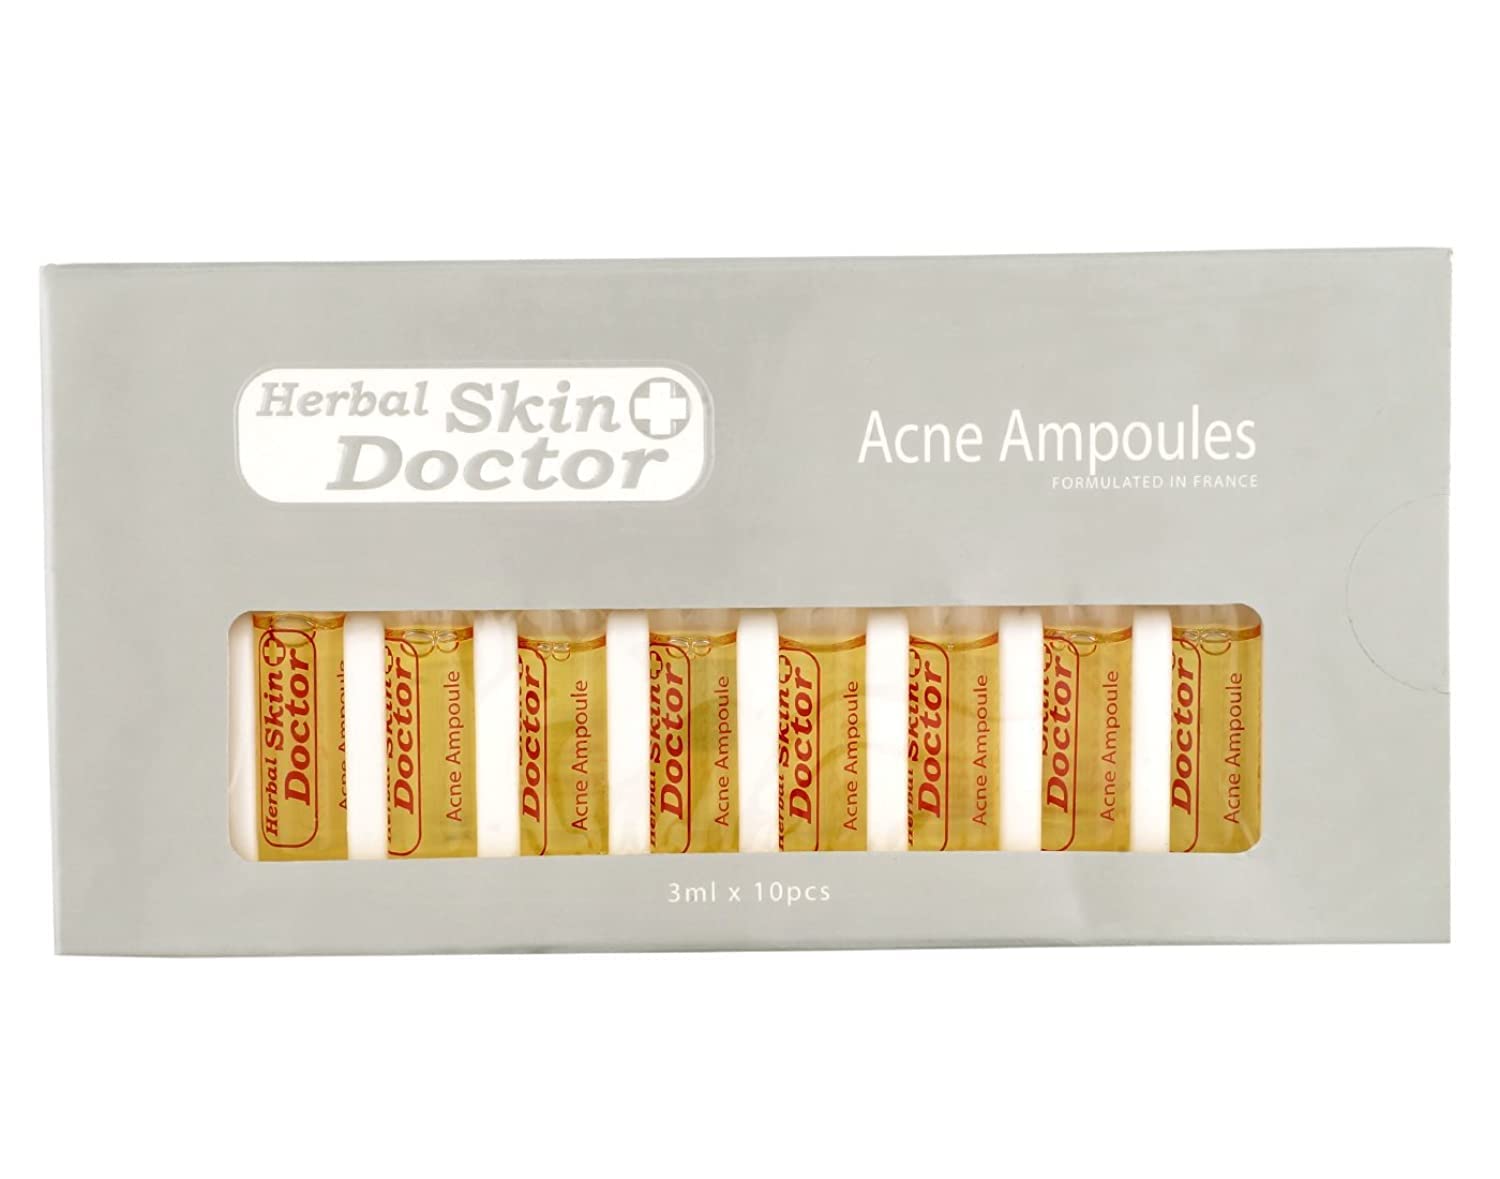 Herbal Skin Doctor Acne Ampoules 3ml*10pcs